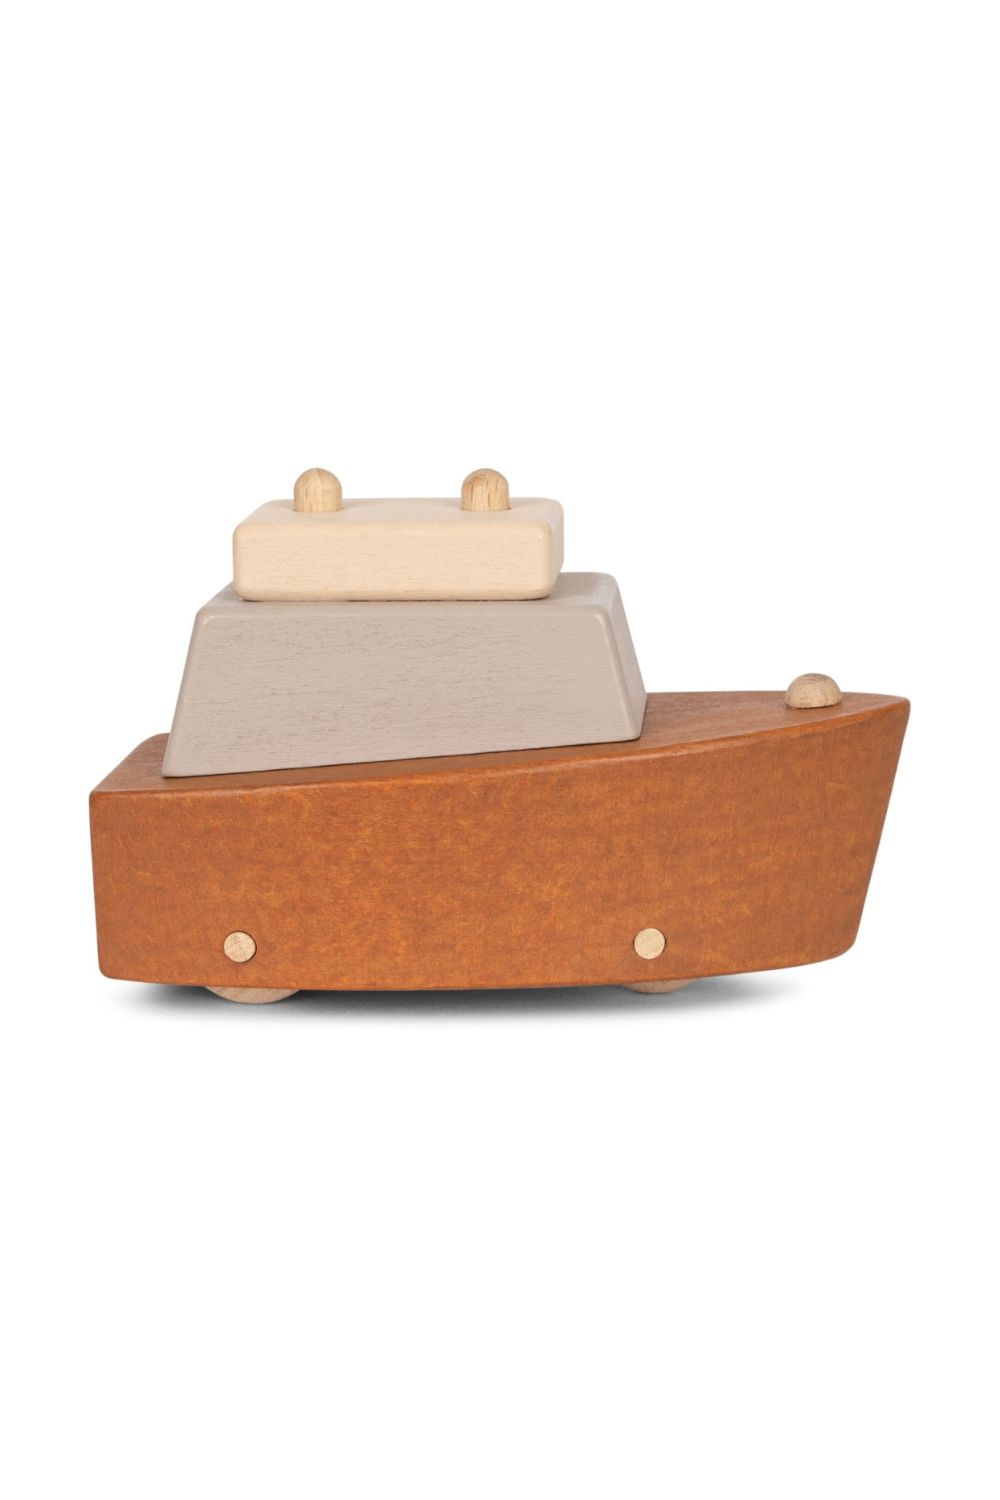 Rolling Wooden Boats (2 pack): Nautical Adventure Toys